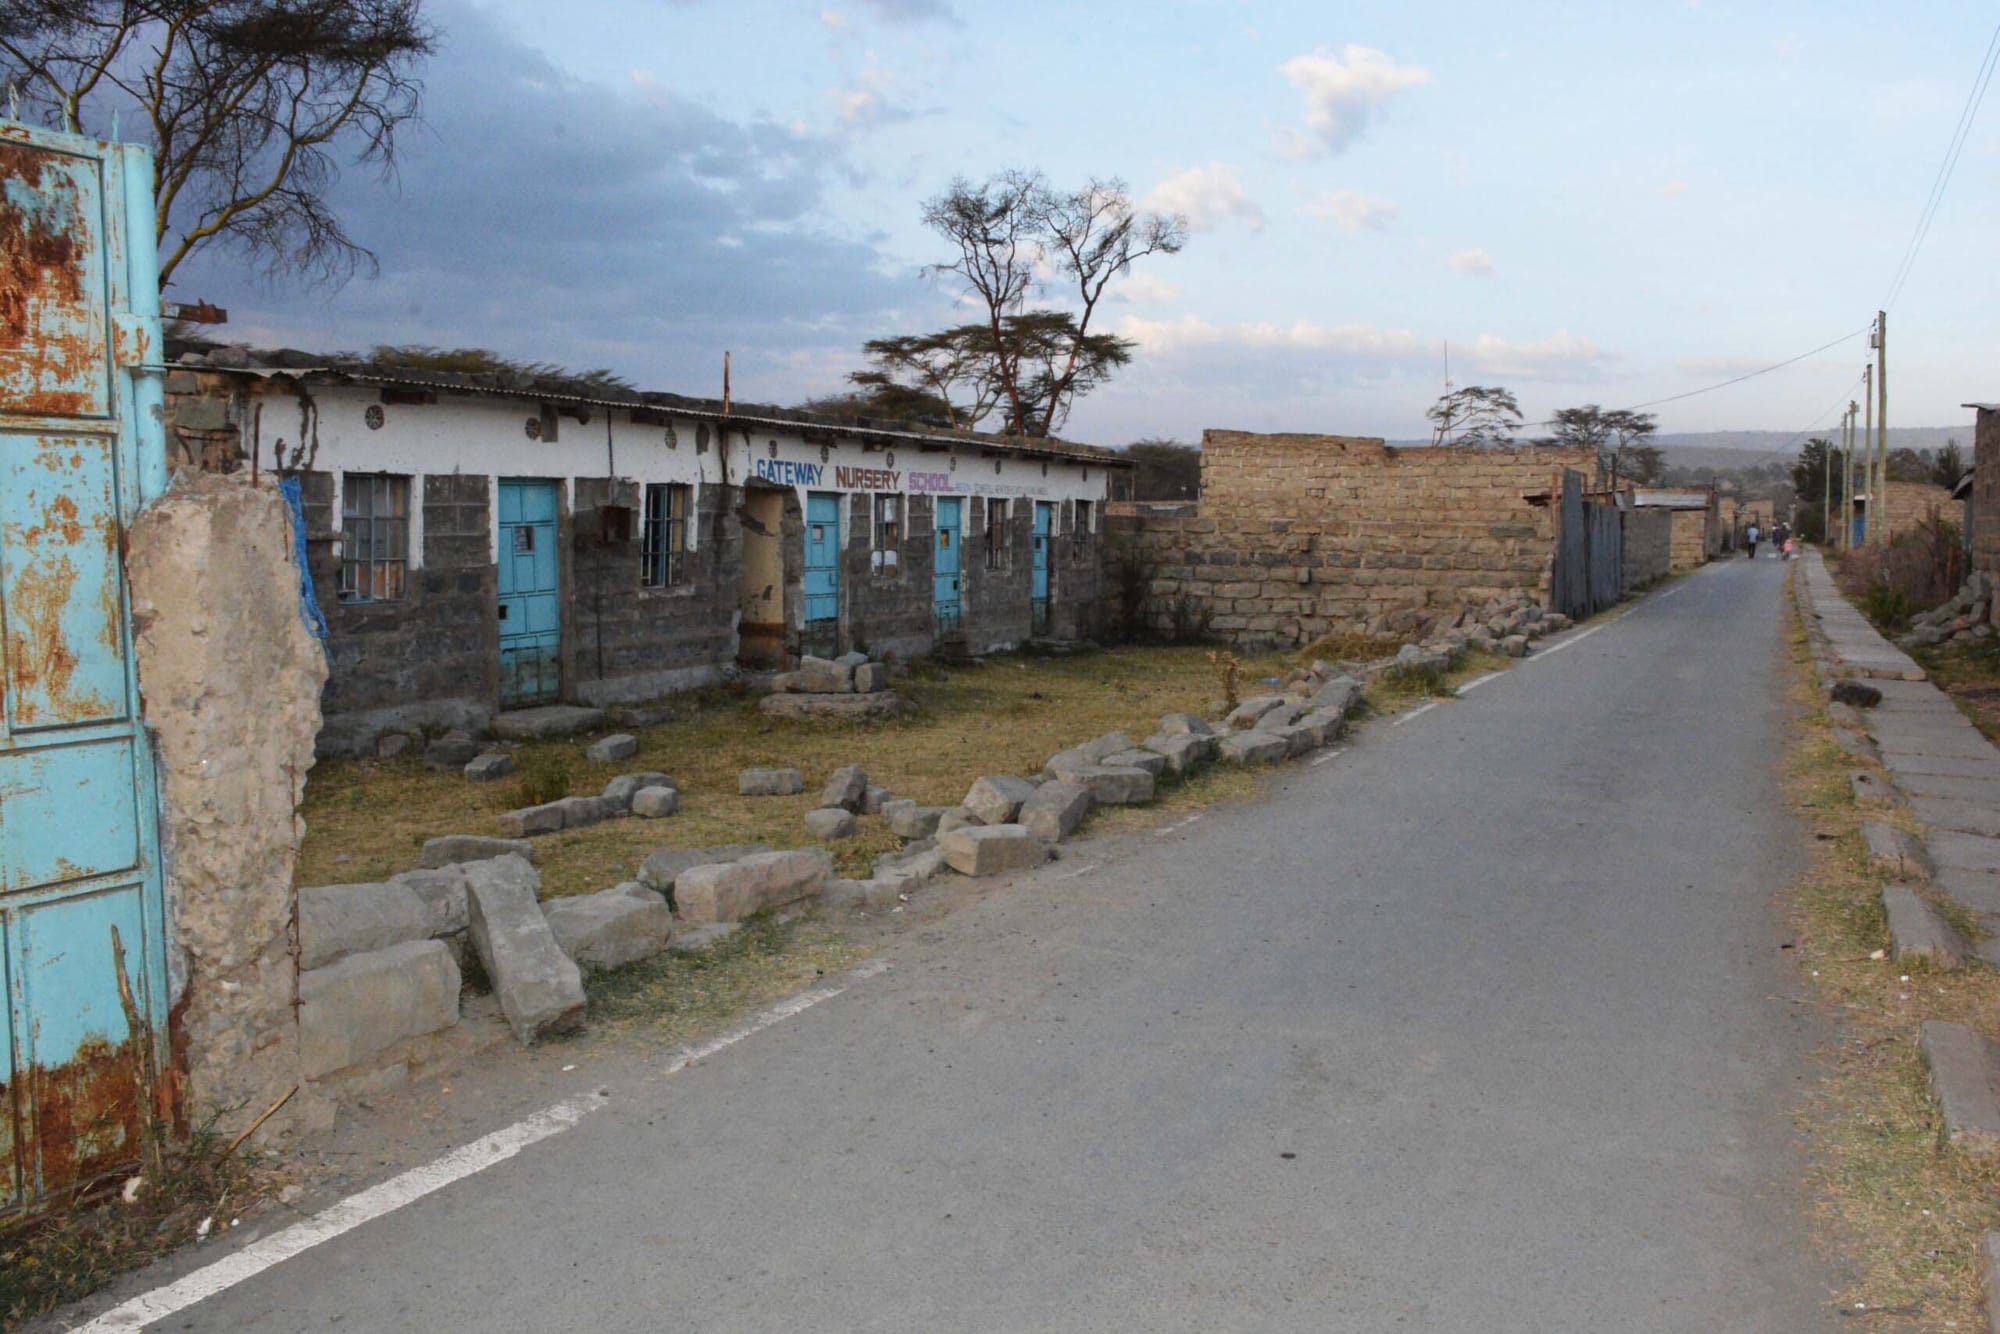 Rift Valley community’s post-flood struggles and resilience